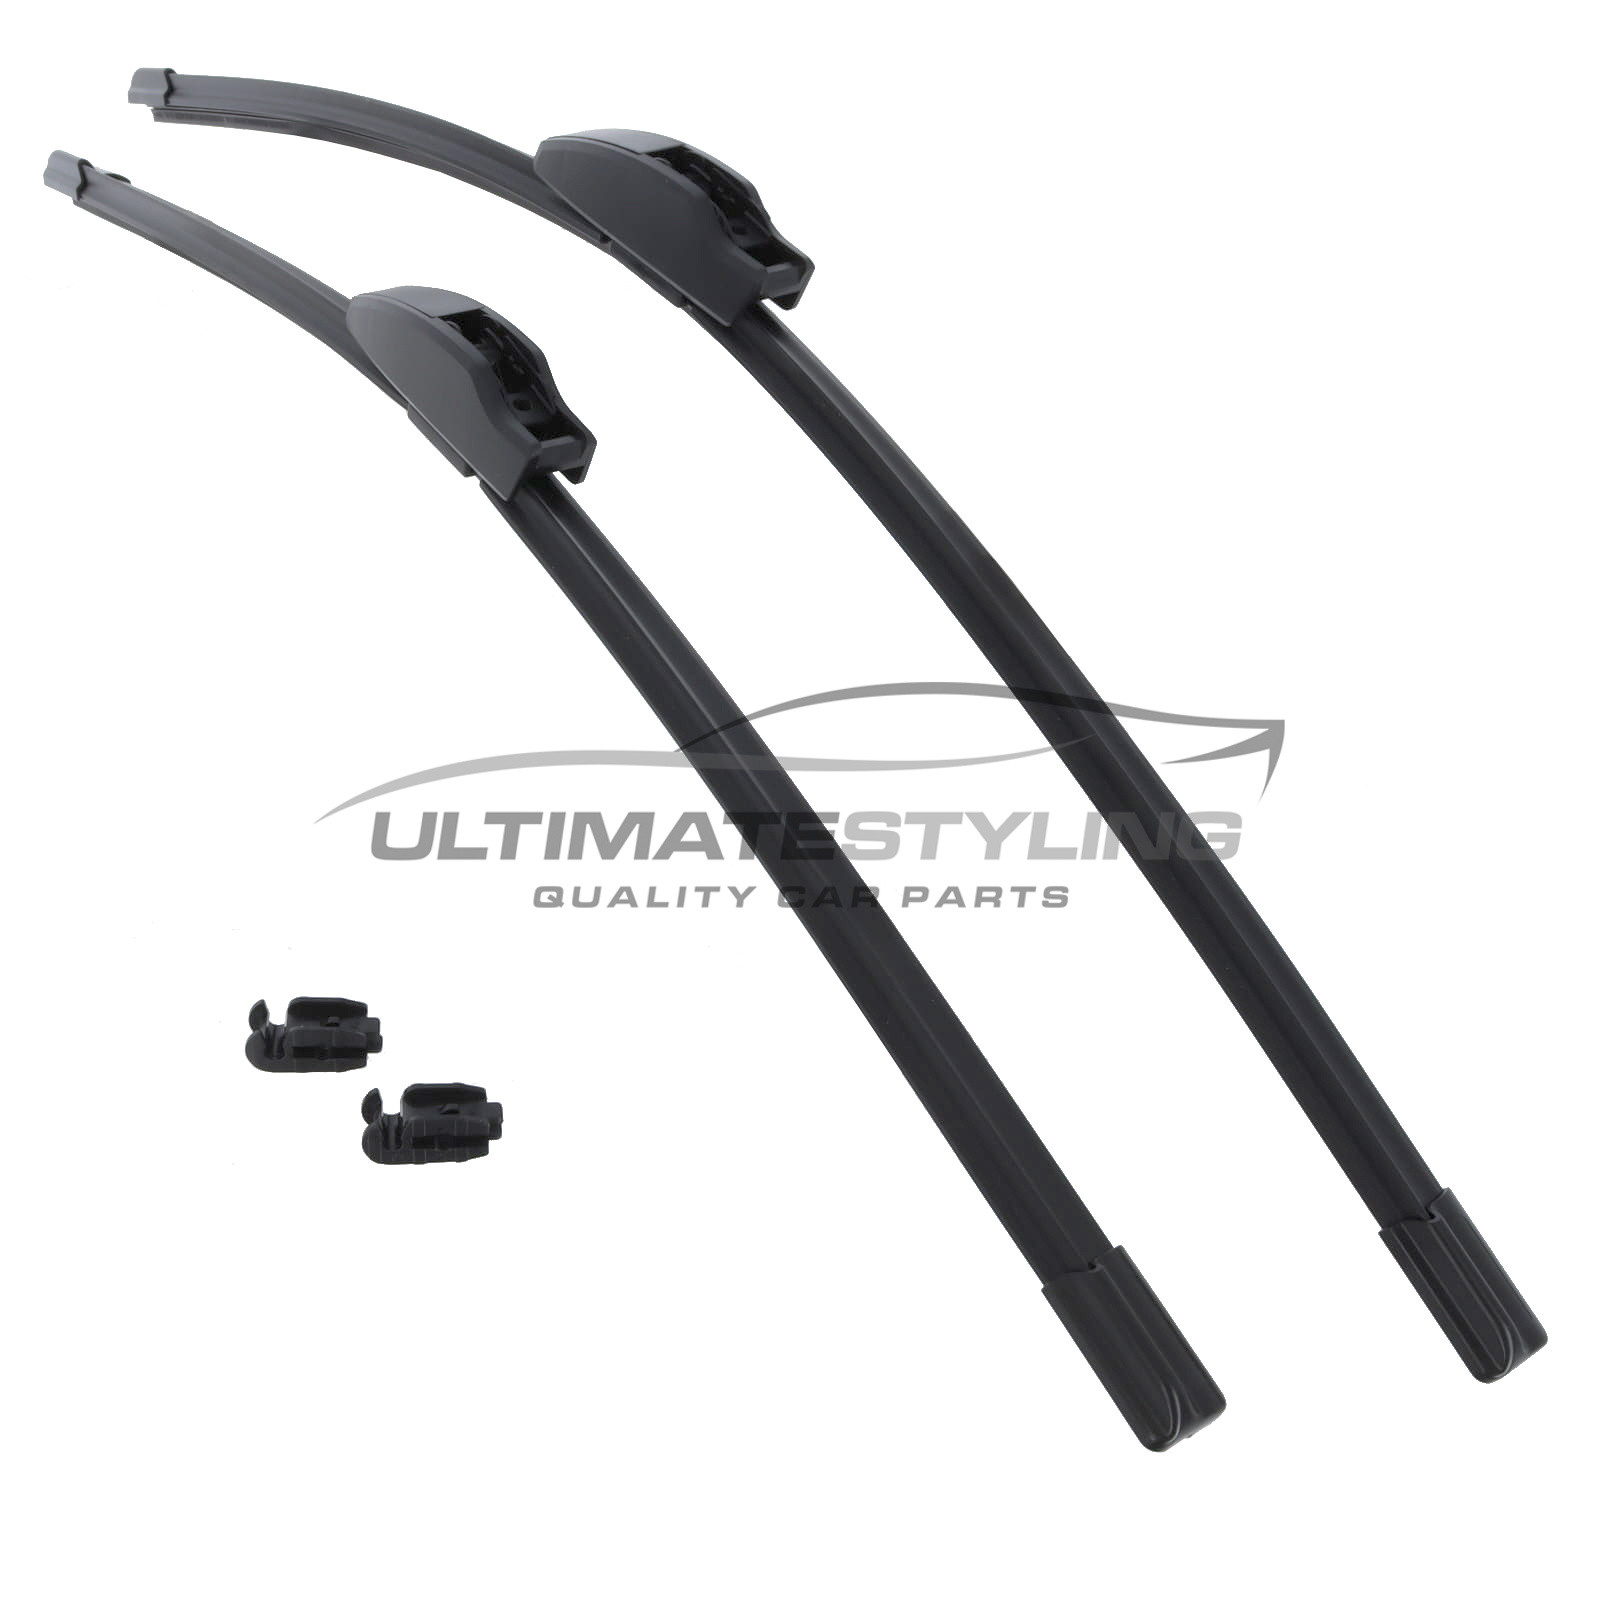 Drivers Side & Passenger Side (Front) Wiper Blades for Lexus RX300